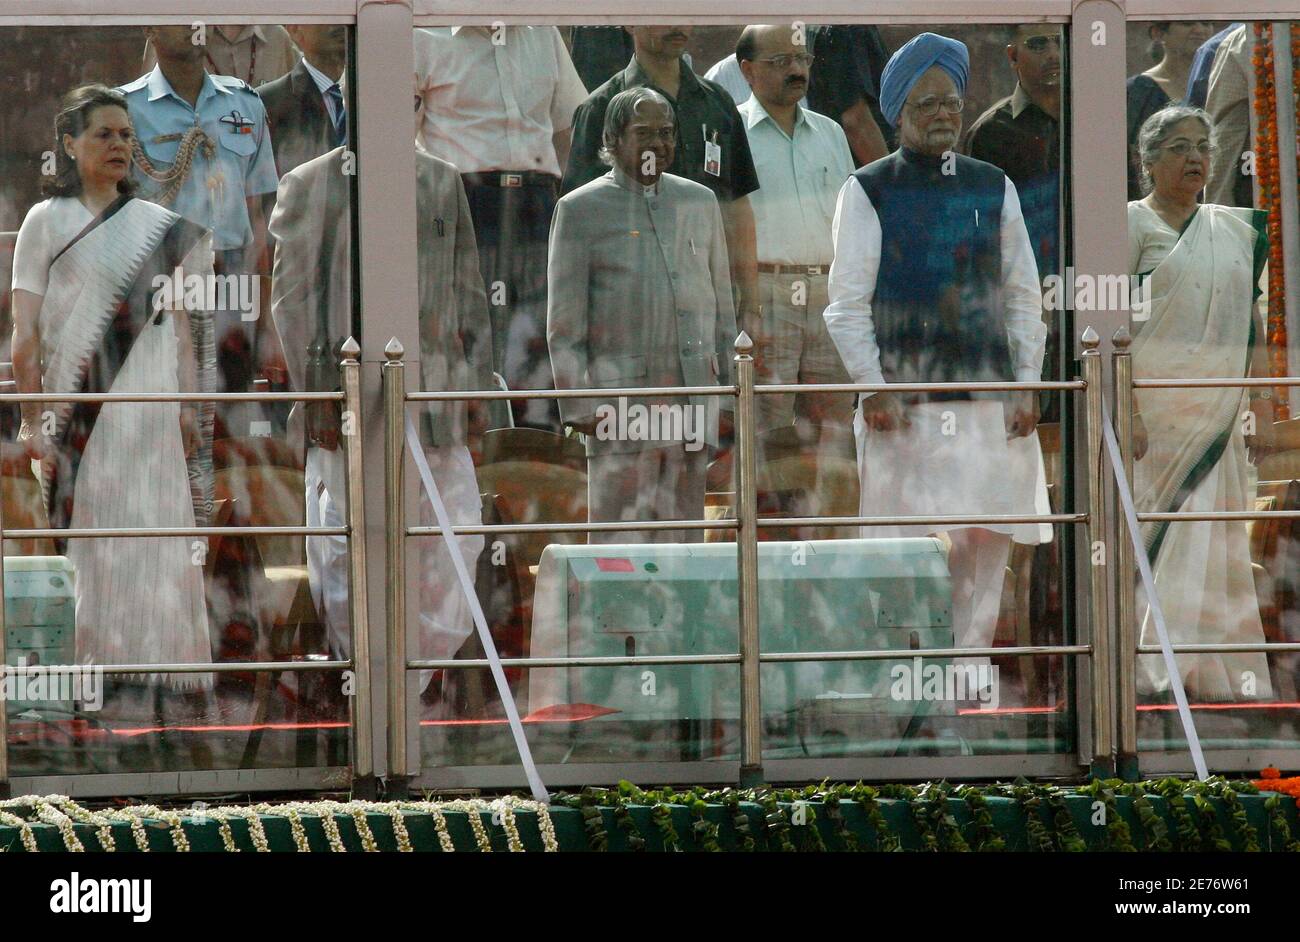 (From L - R) Chief of India's ruling Congress party Sonia Gandhi, Indian President A. P. J. Abdul Kalam, Indian Prime Minister Manmohan Singh and his wife Gursharan Kaur stand behind a bulletproof glass during the celebrations to mark the 150th anniversary of its First War of Independence against British rule at the historic Red Fort in New Delhi May 11, 2007. India celebrated the 150th anniversary of its First War of Independence against British rule on Friday, poking fun at its former colonial rulers at a historic fort in the capital which saw much bloodshed on both sides. The festivities ce Stock Photo